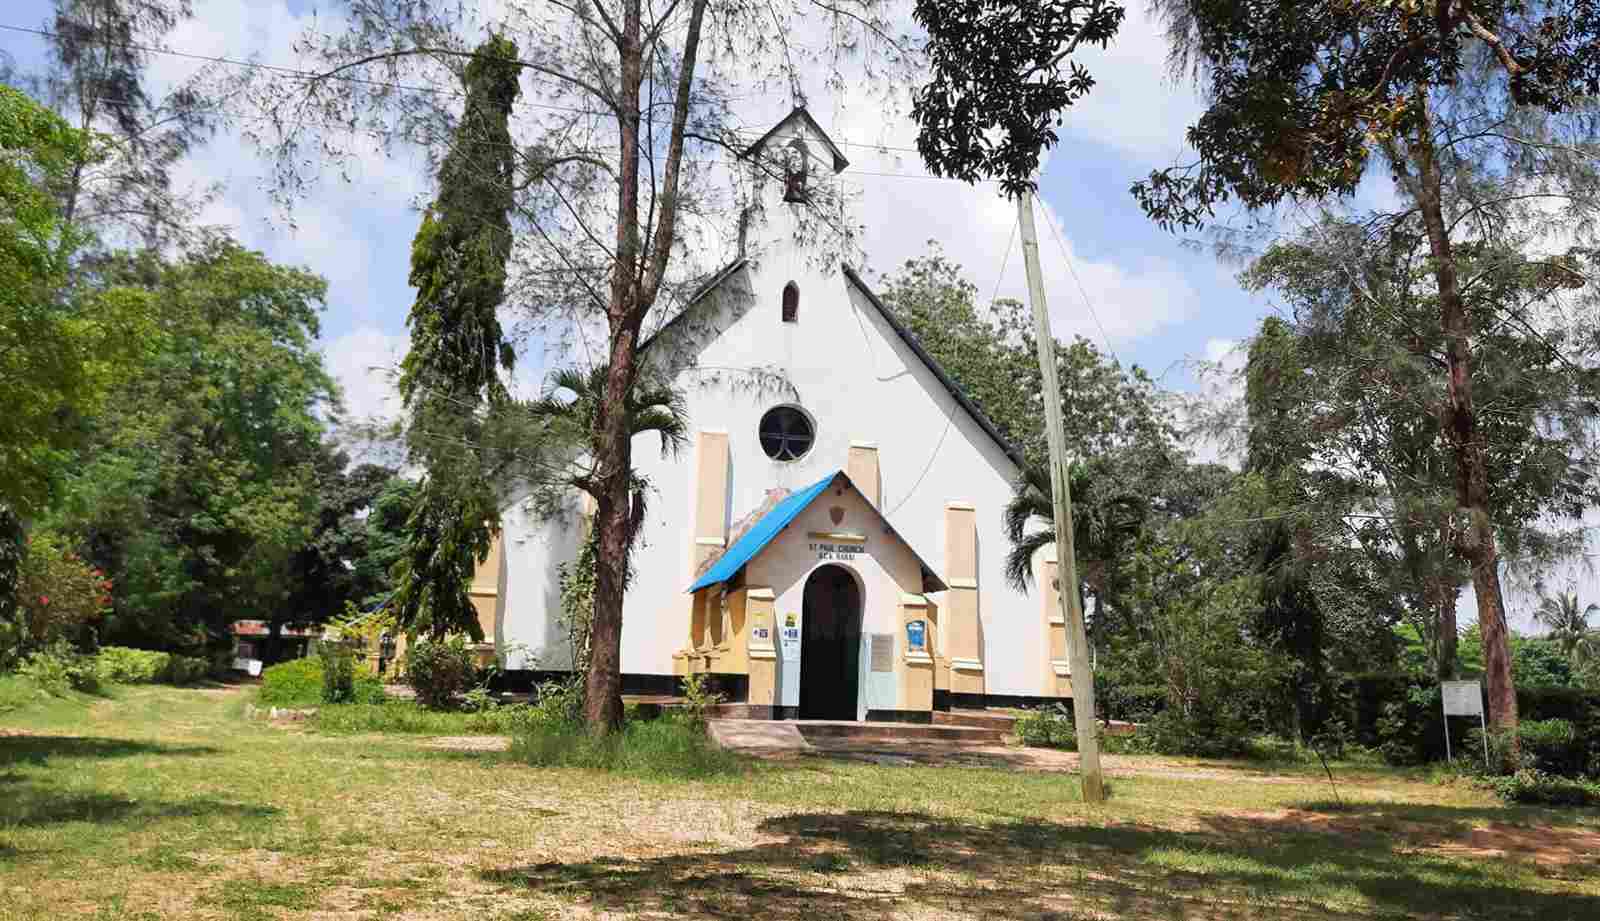 First Missionary School in Kenya Built by Missionaries